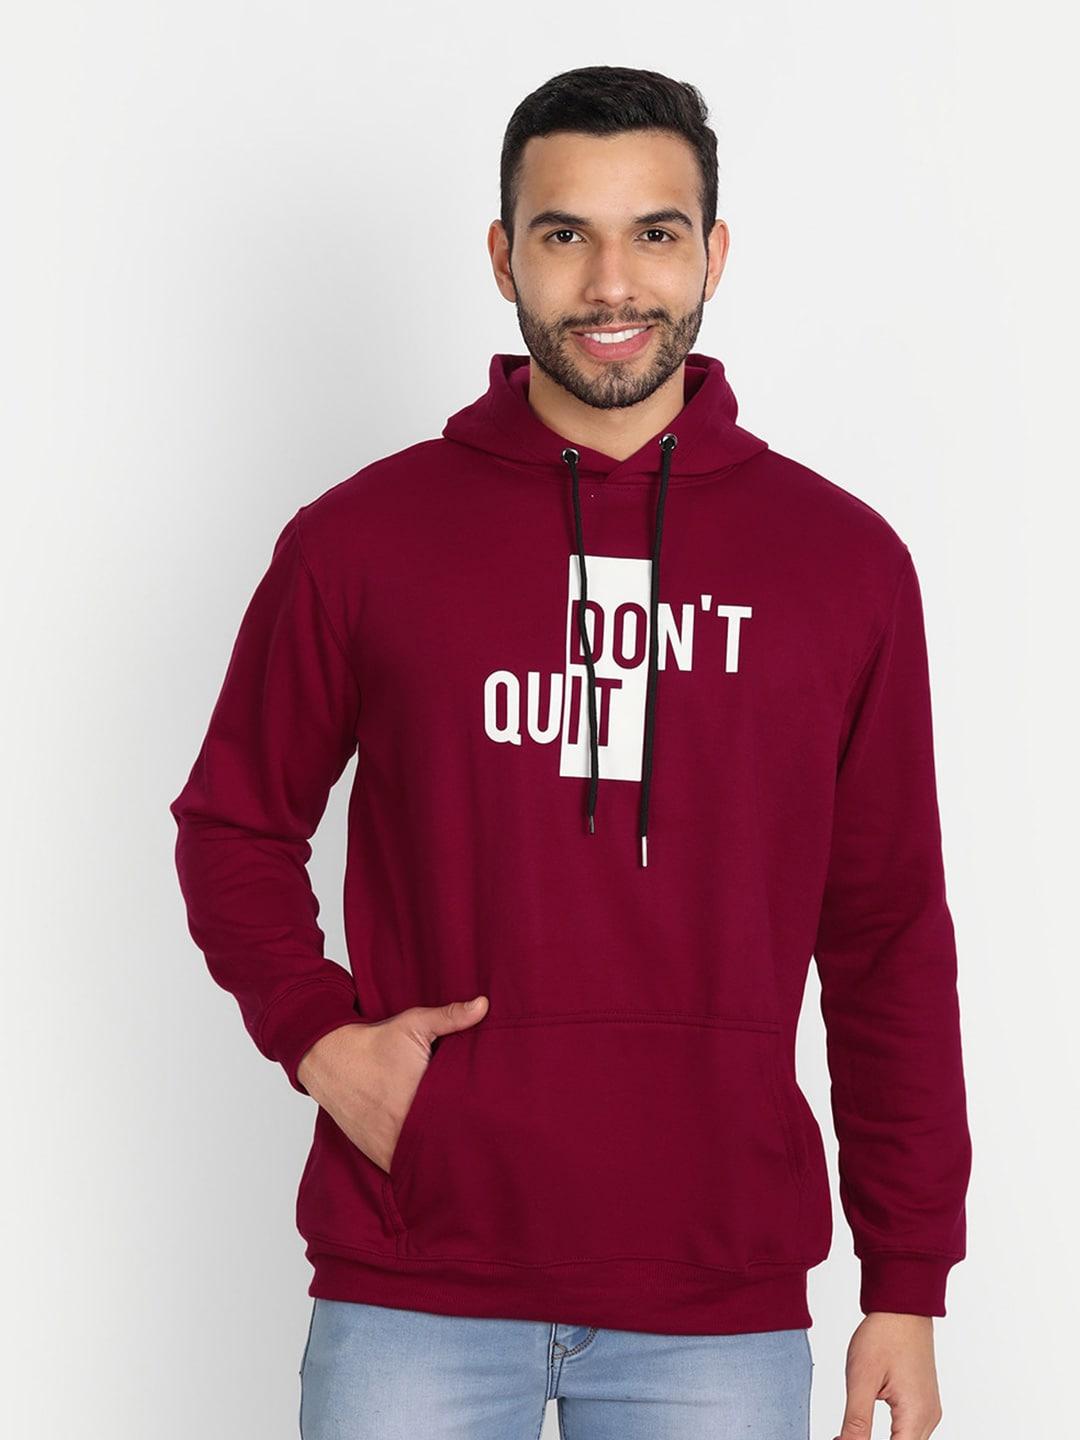 absolute defense printed pure cotton hooded pullover sweatshirt